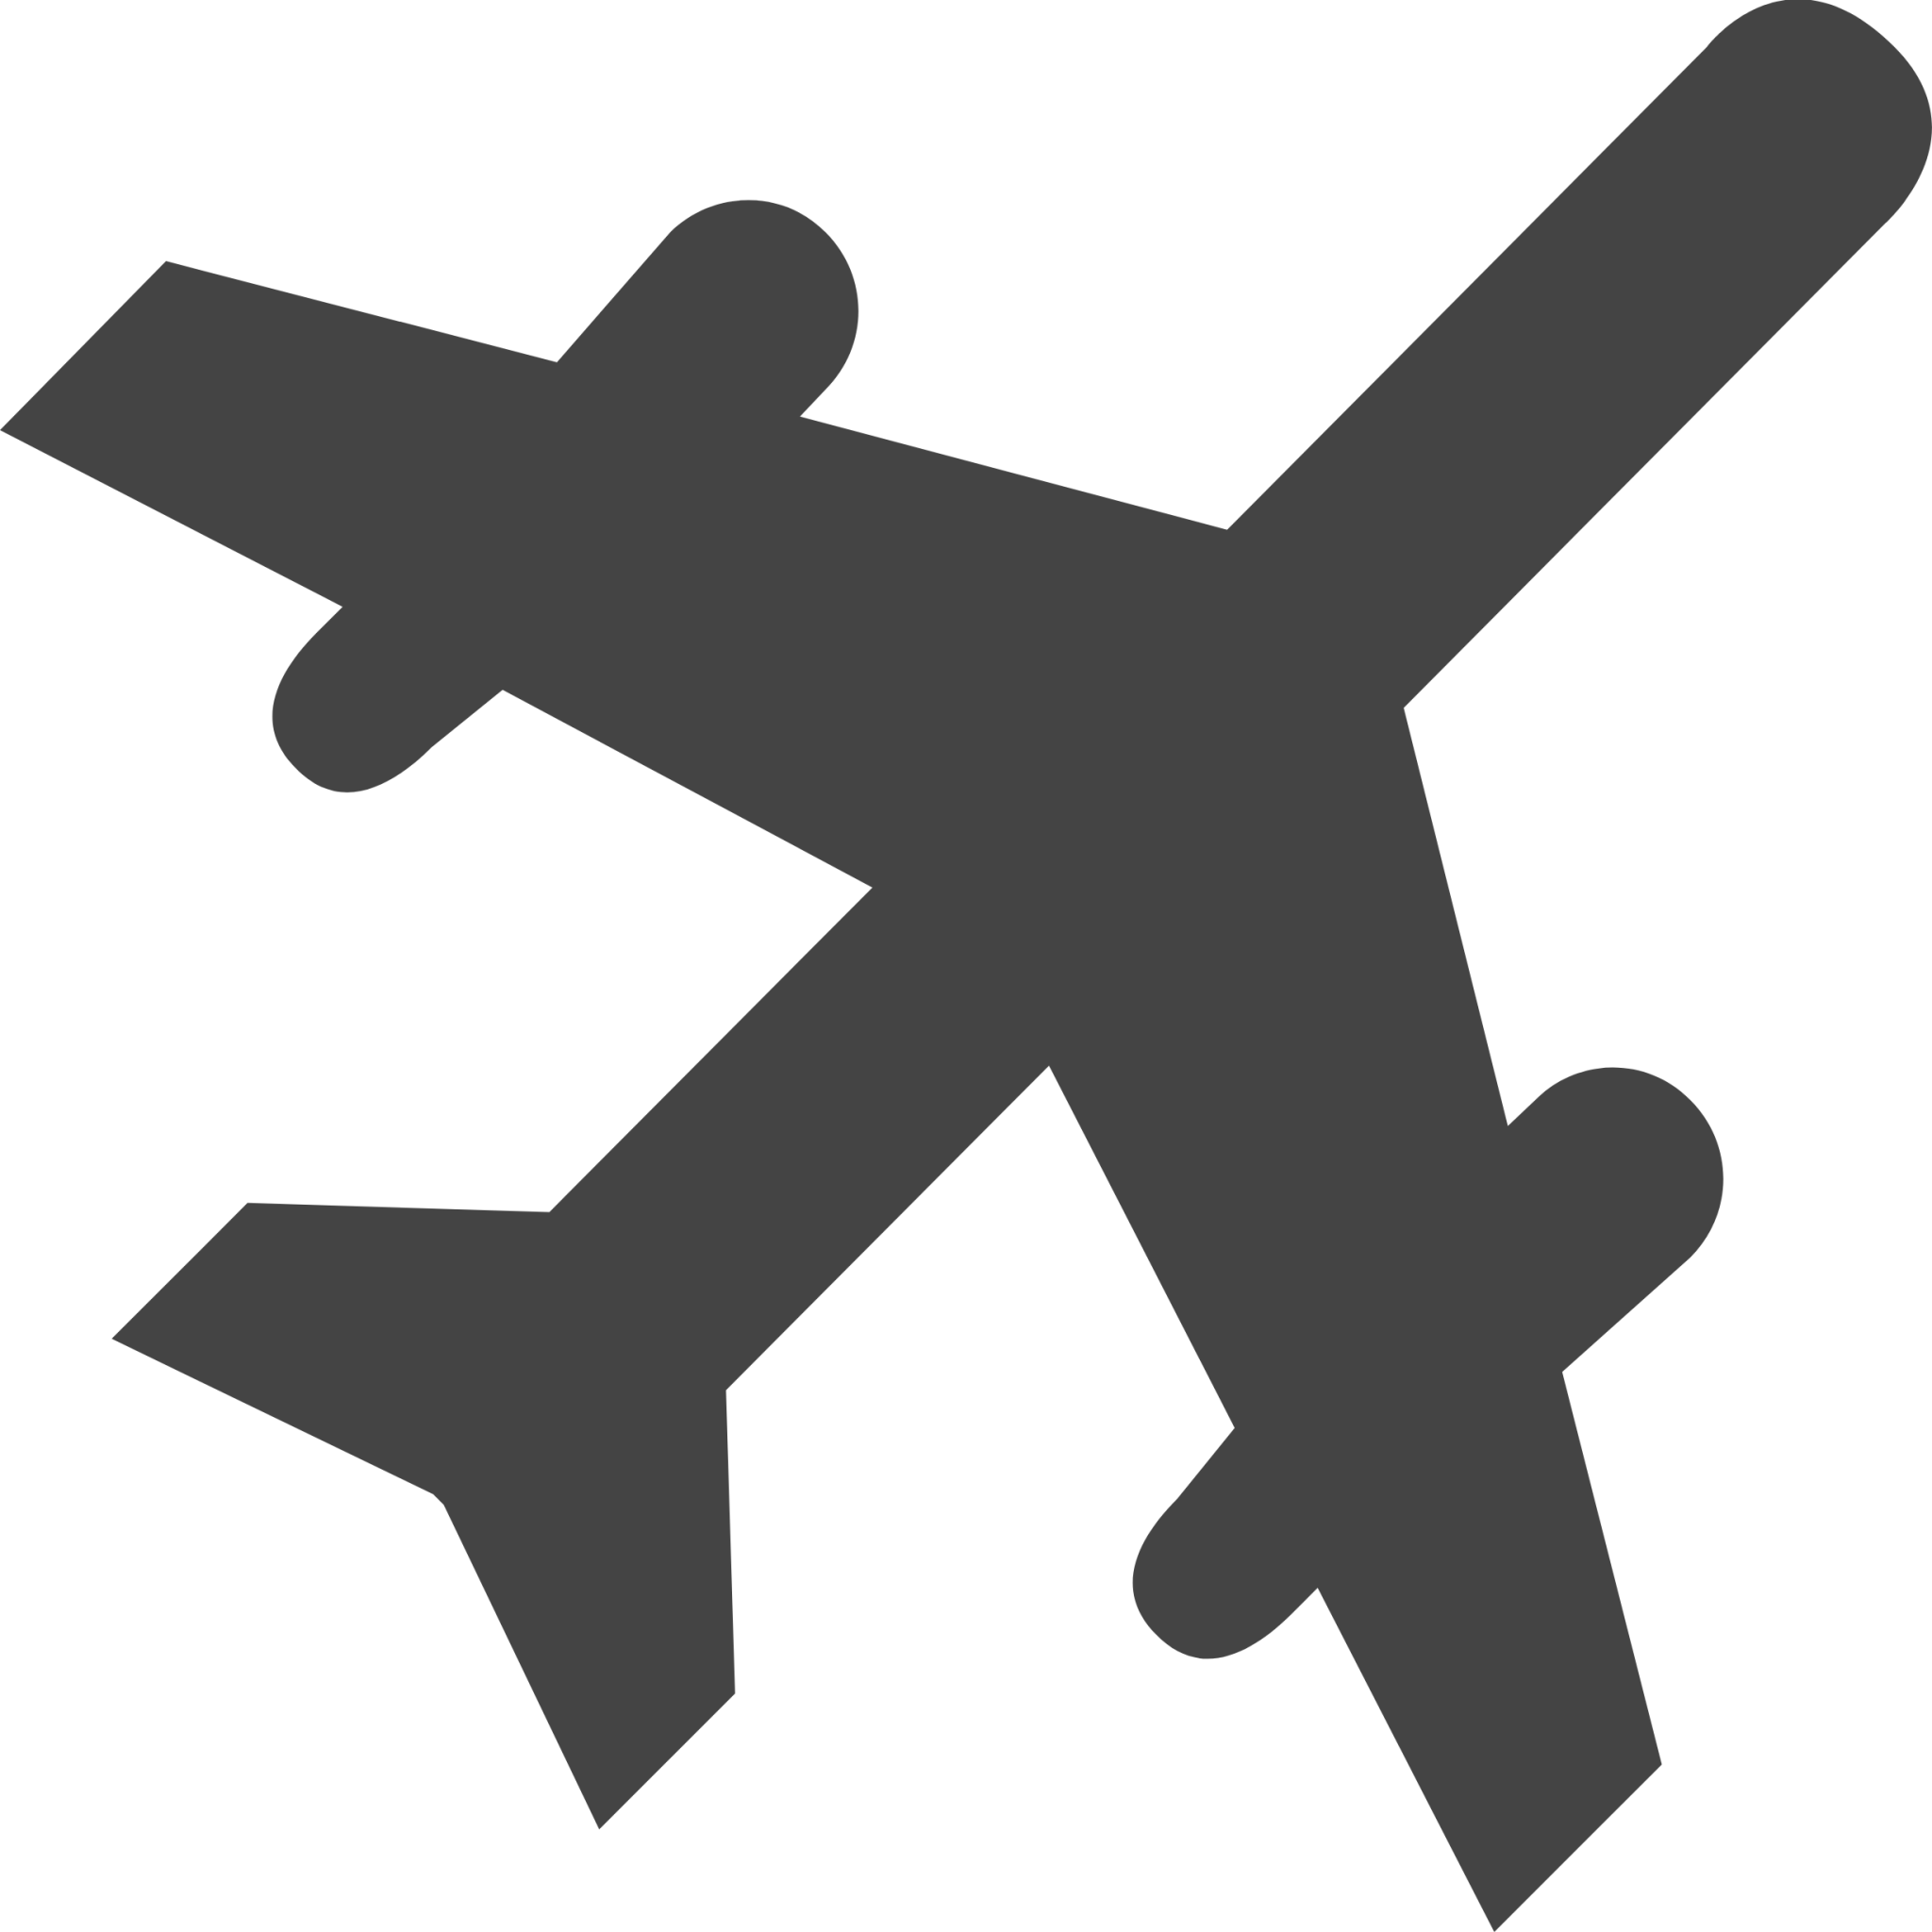 plane icon png